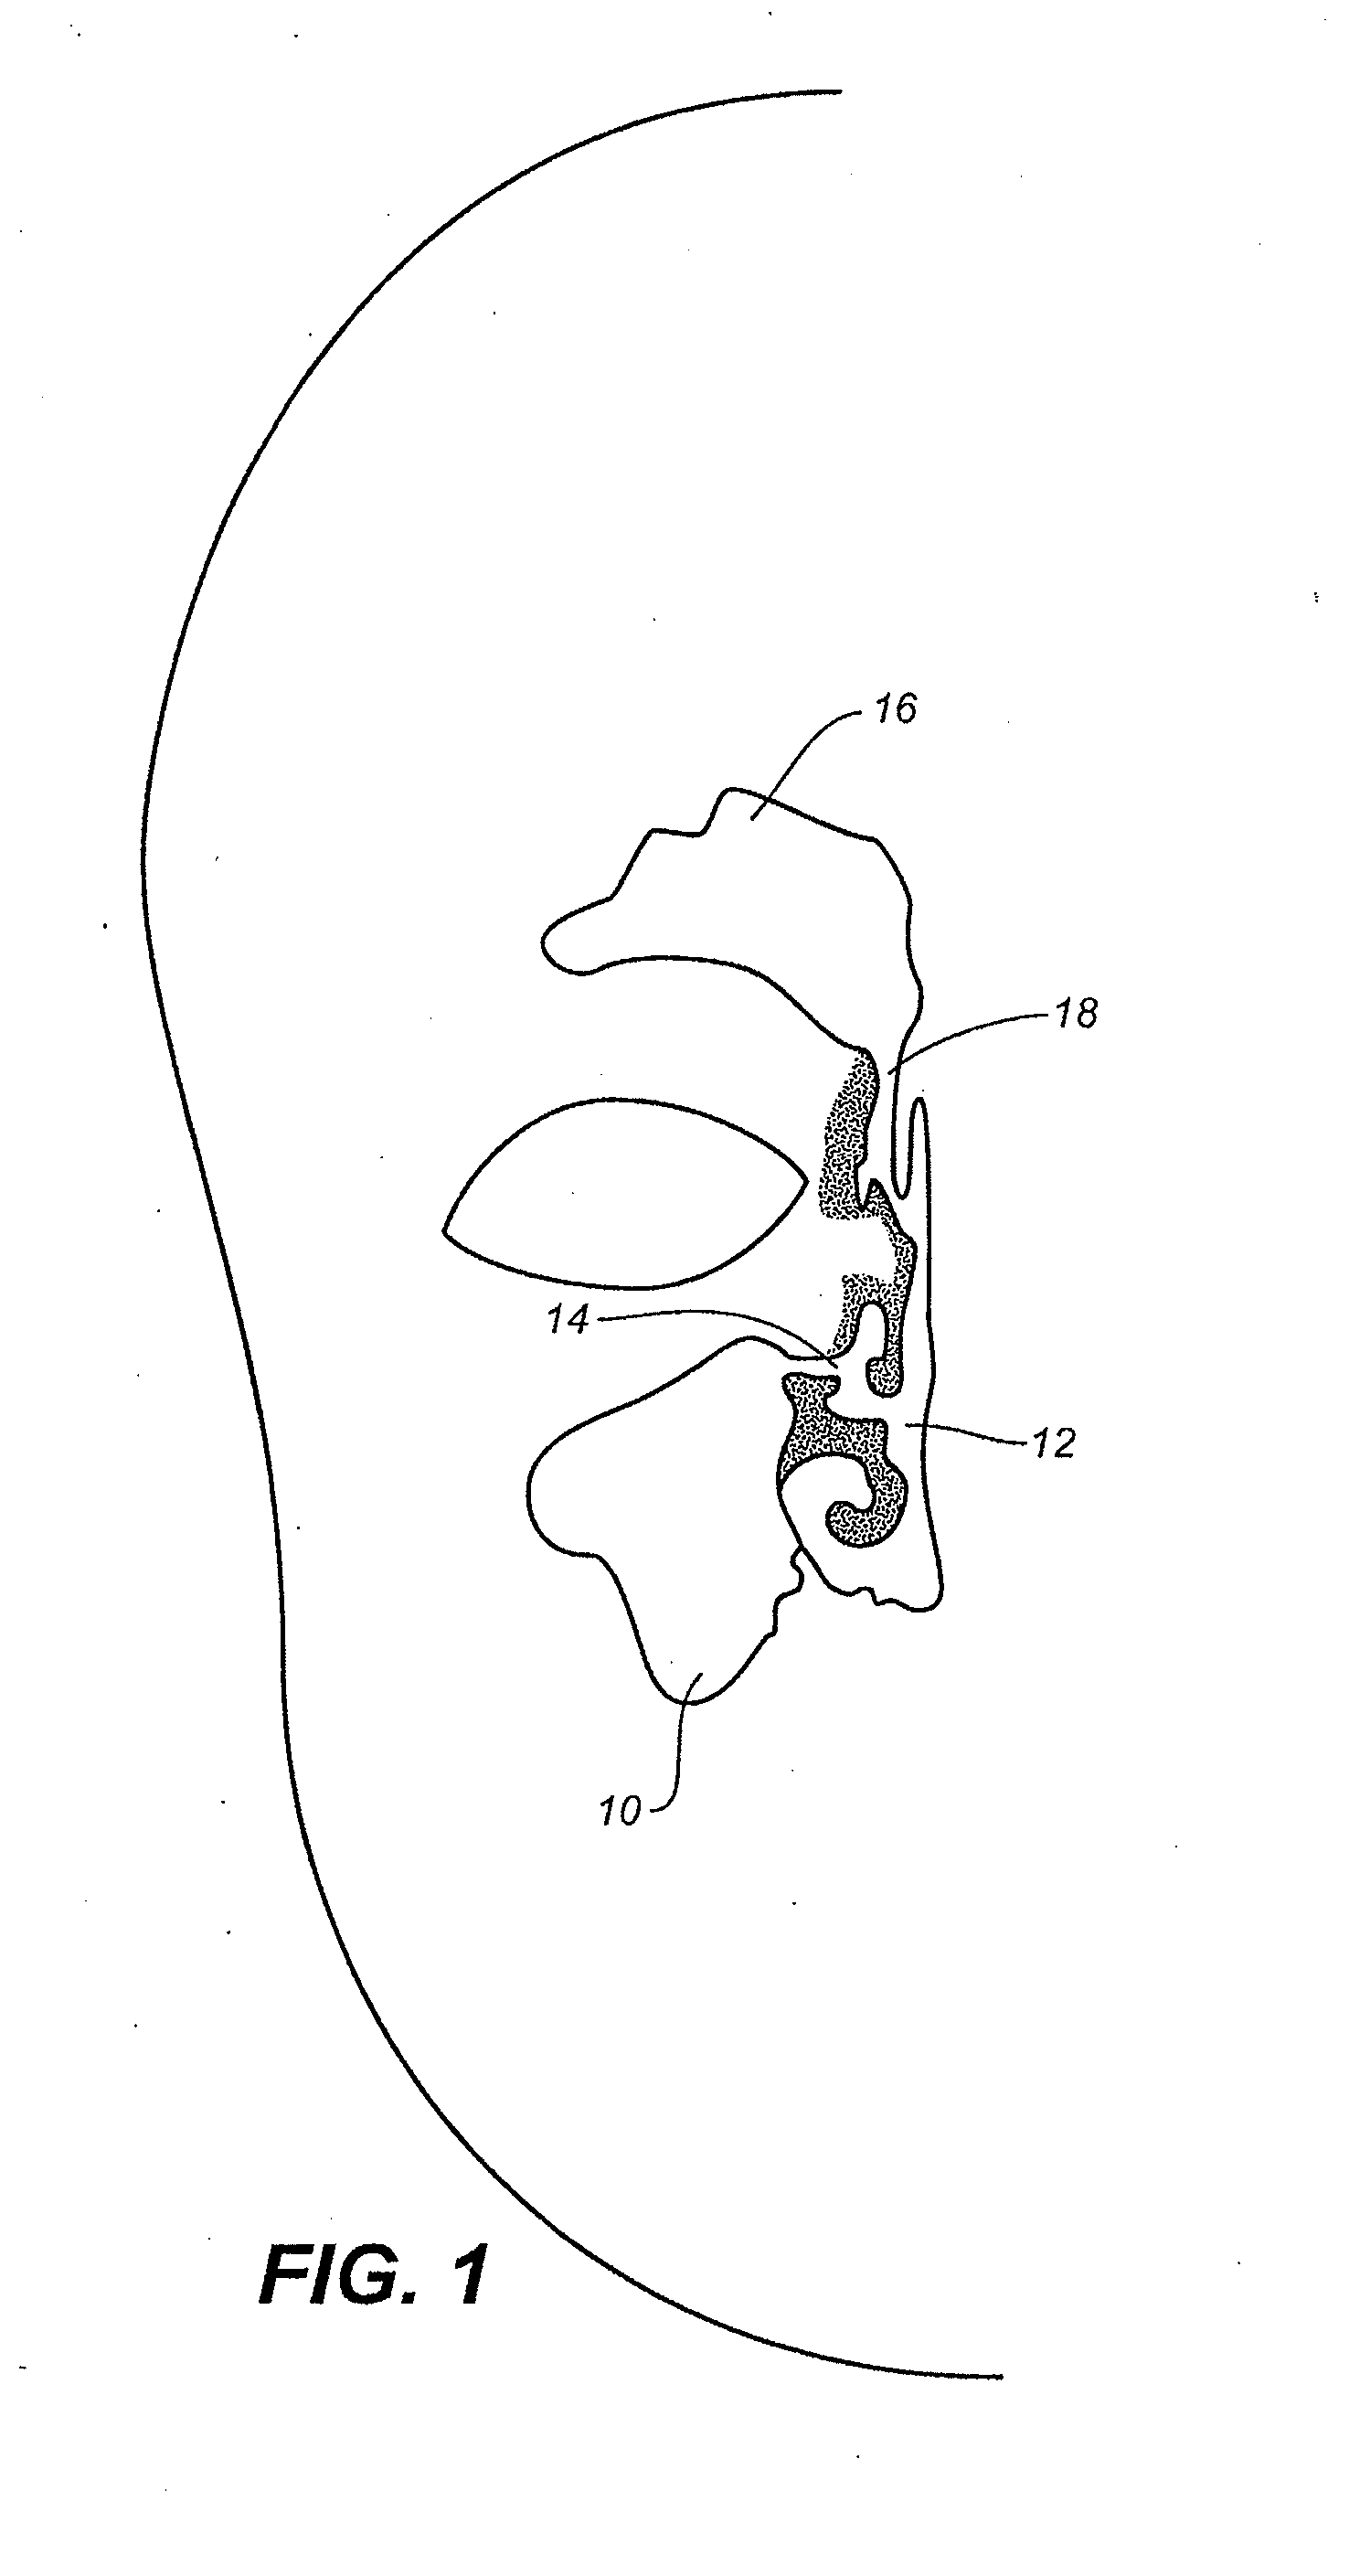 Device and methods for treating paranasal sinus conditions